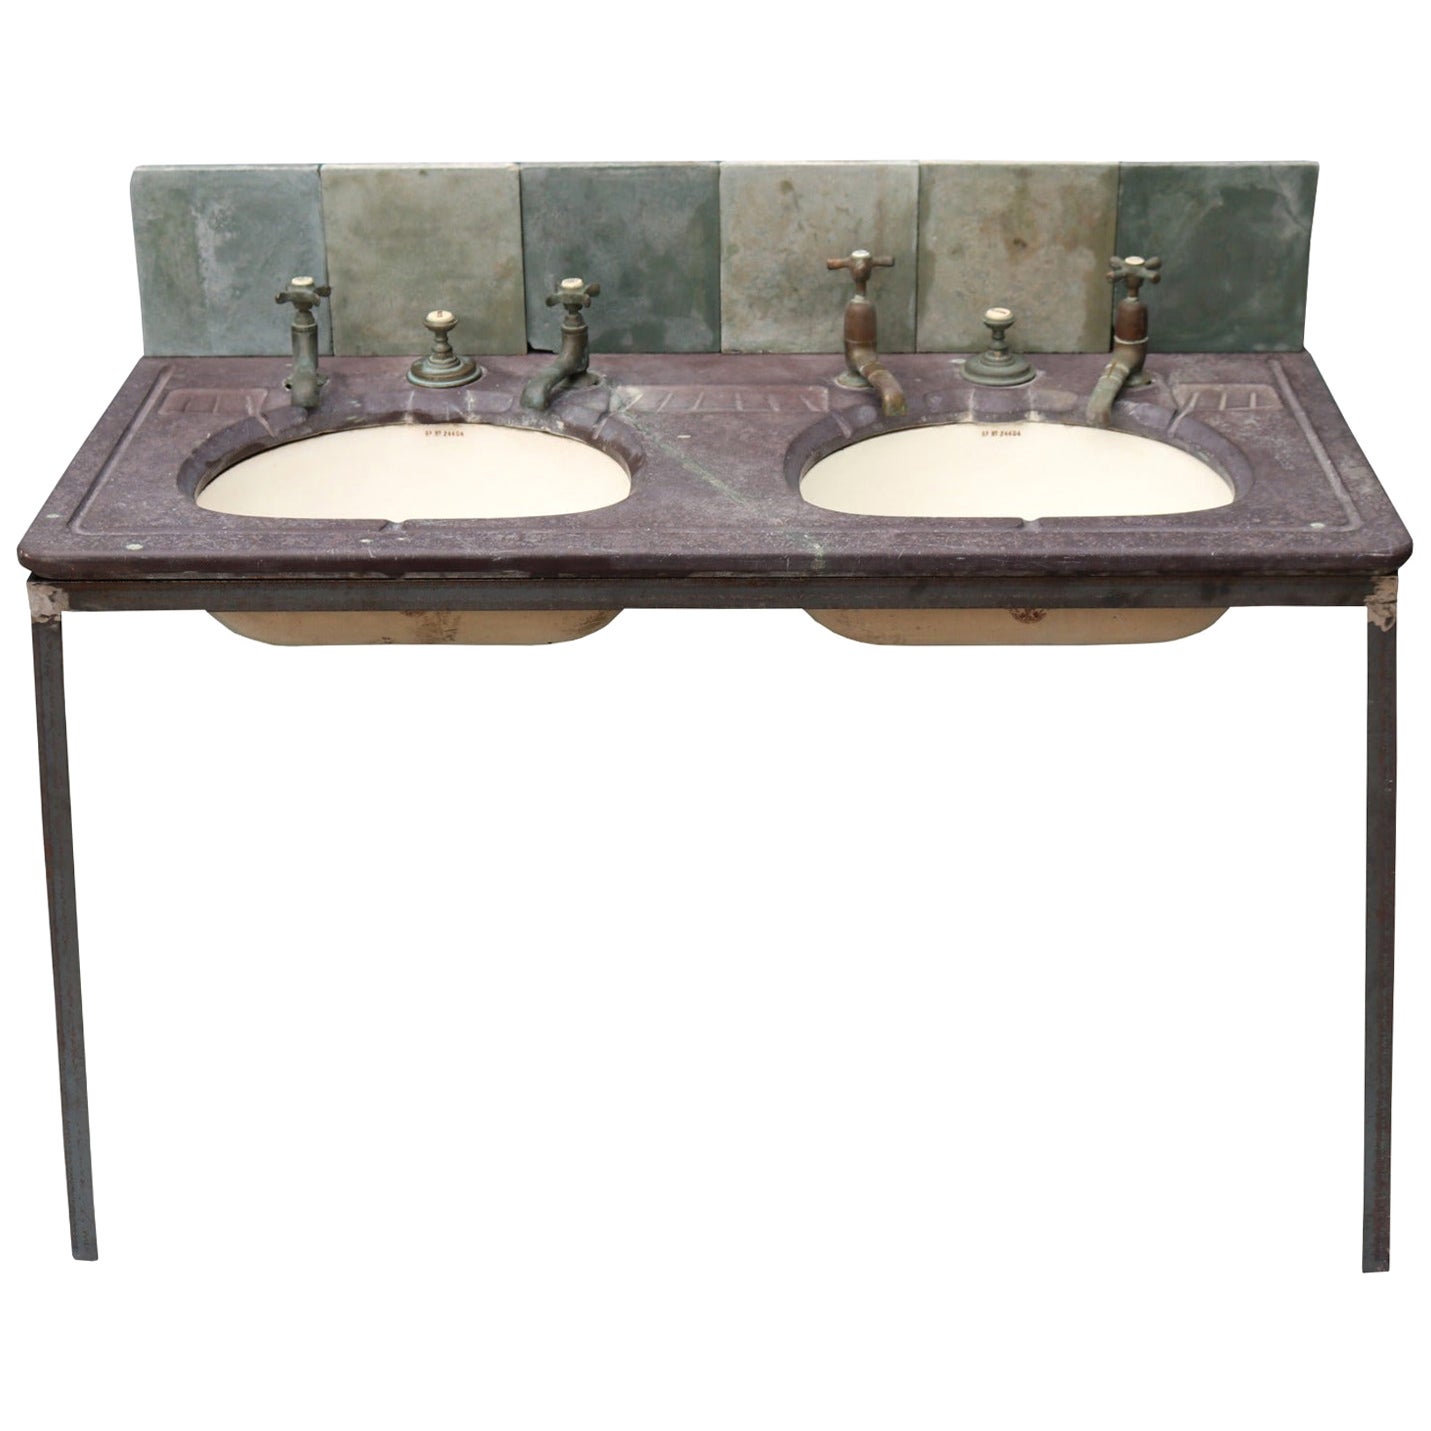 Reclaimed Antique Double Basin with Stand For Sale